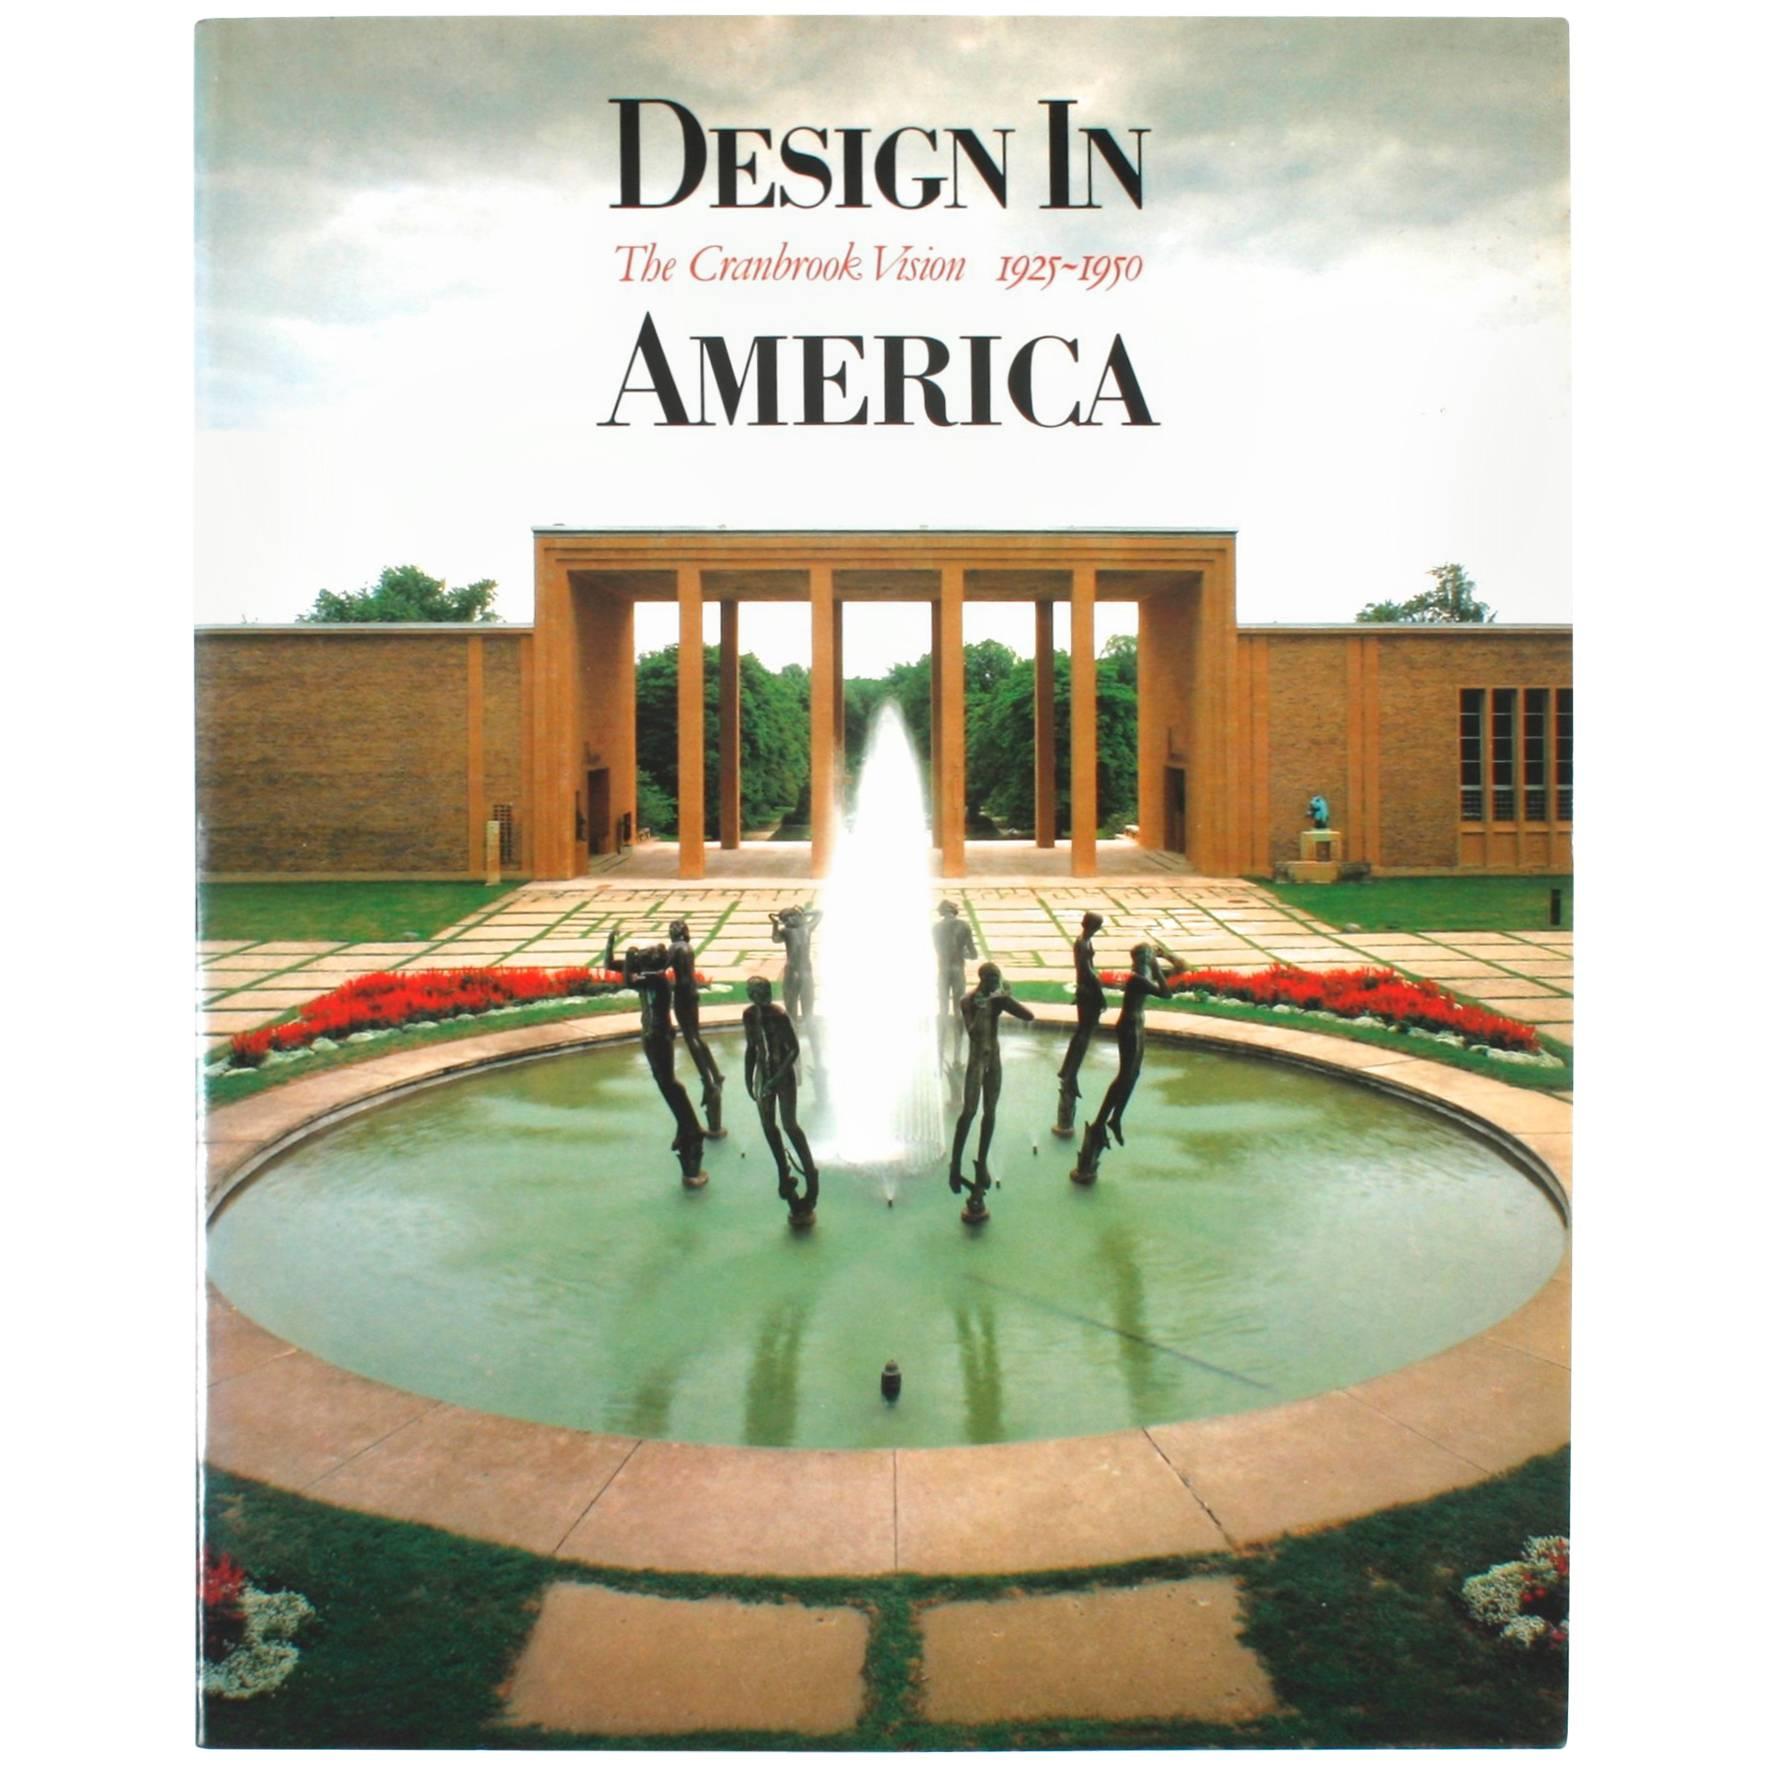 Design in America the Cranbrook Vision, 1925-1950 by Robert Judson Clark For Sale